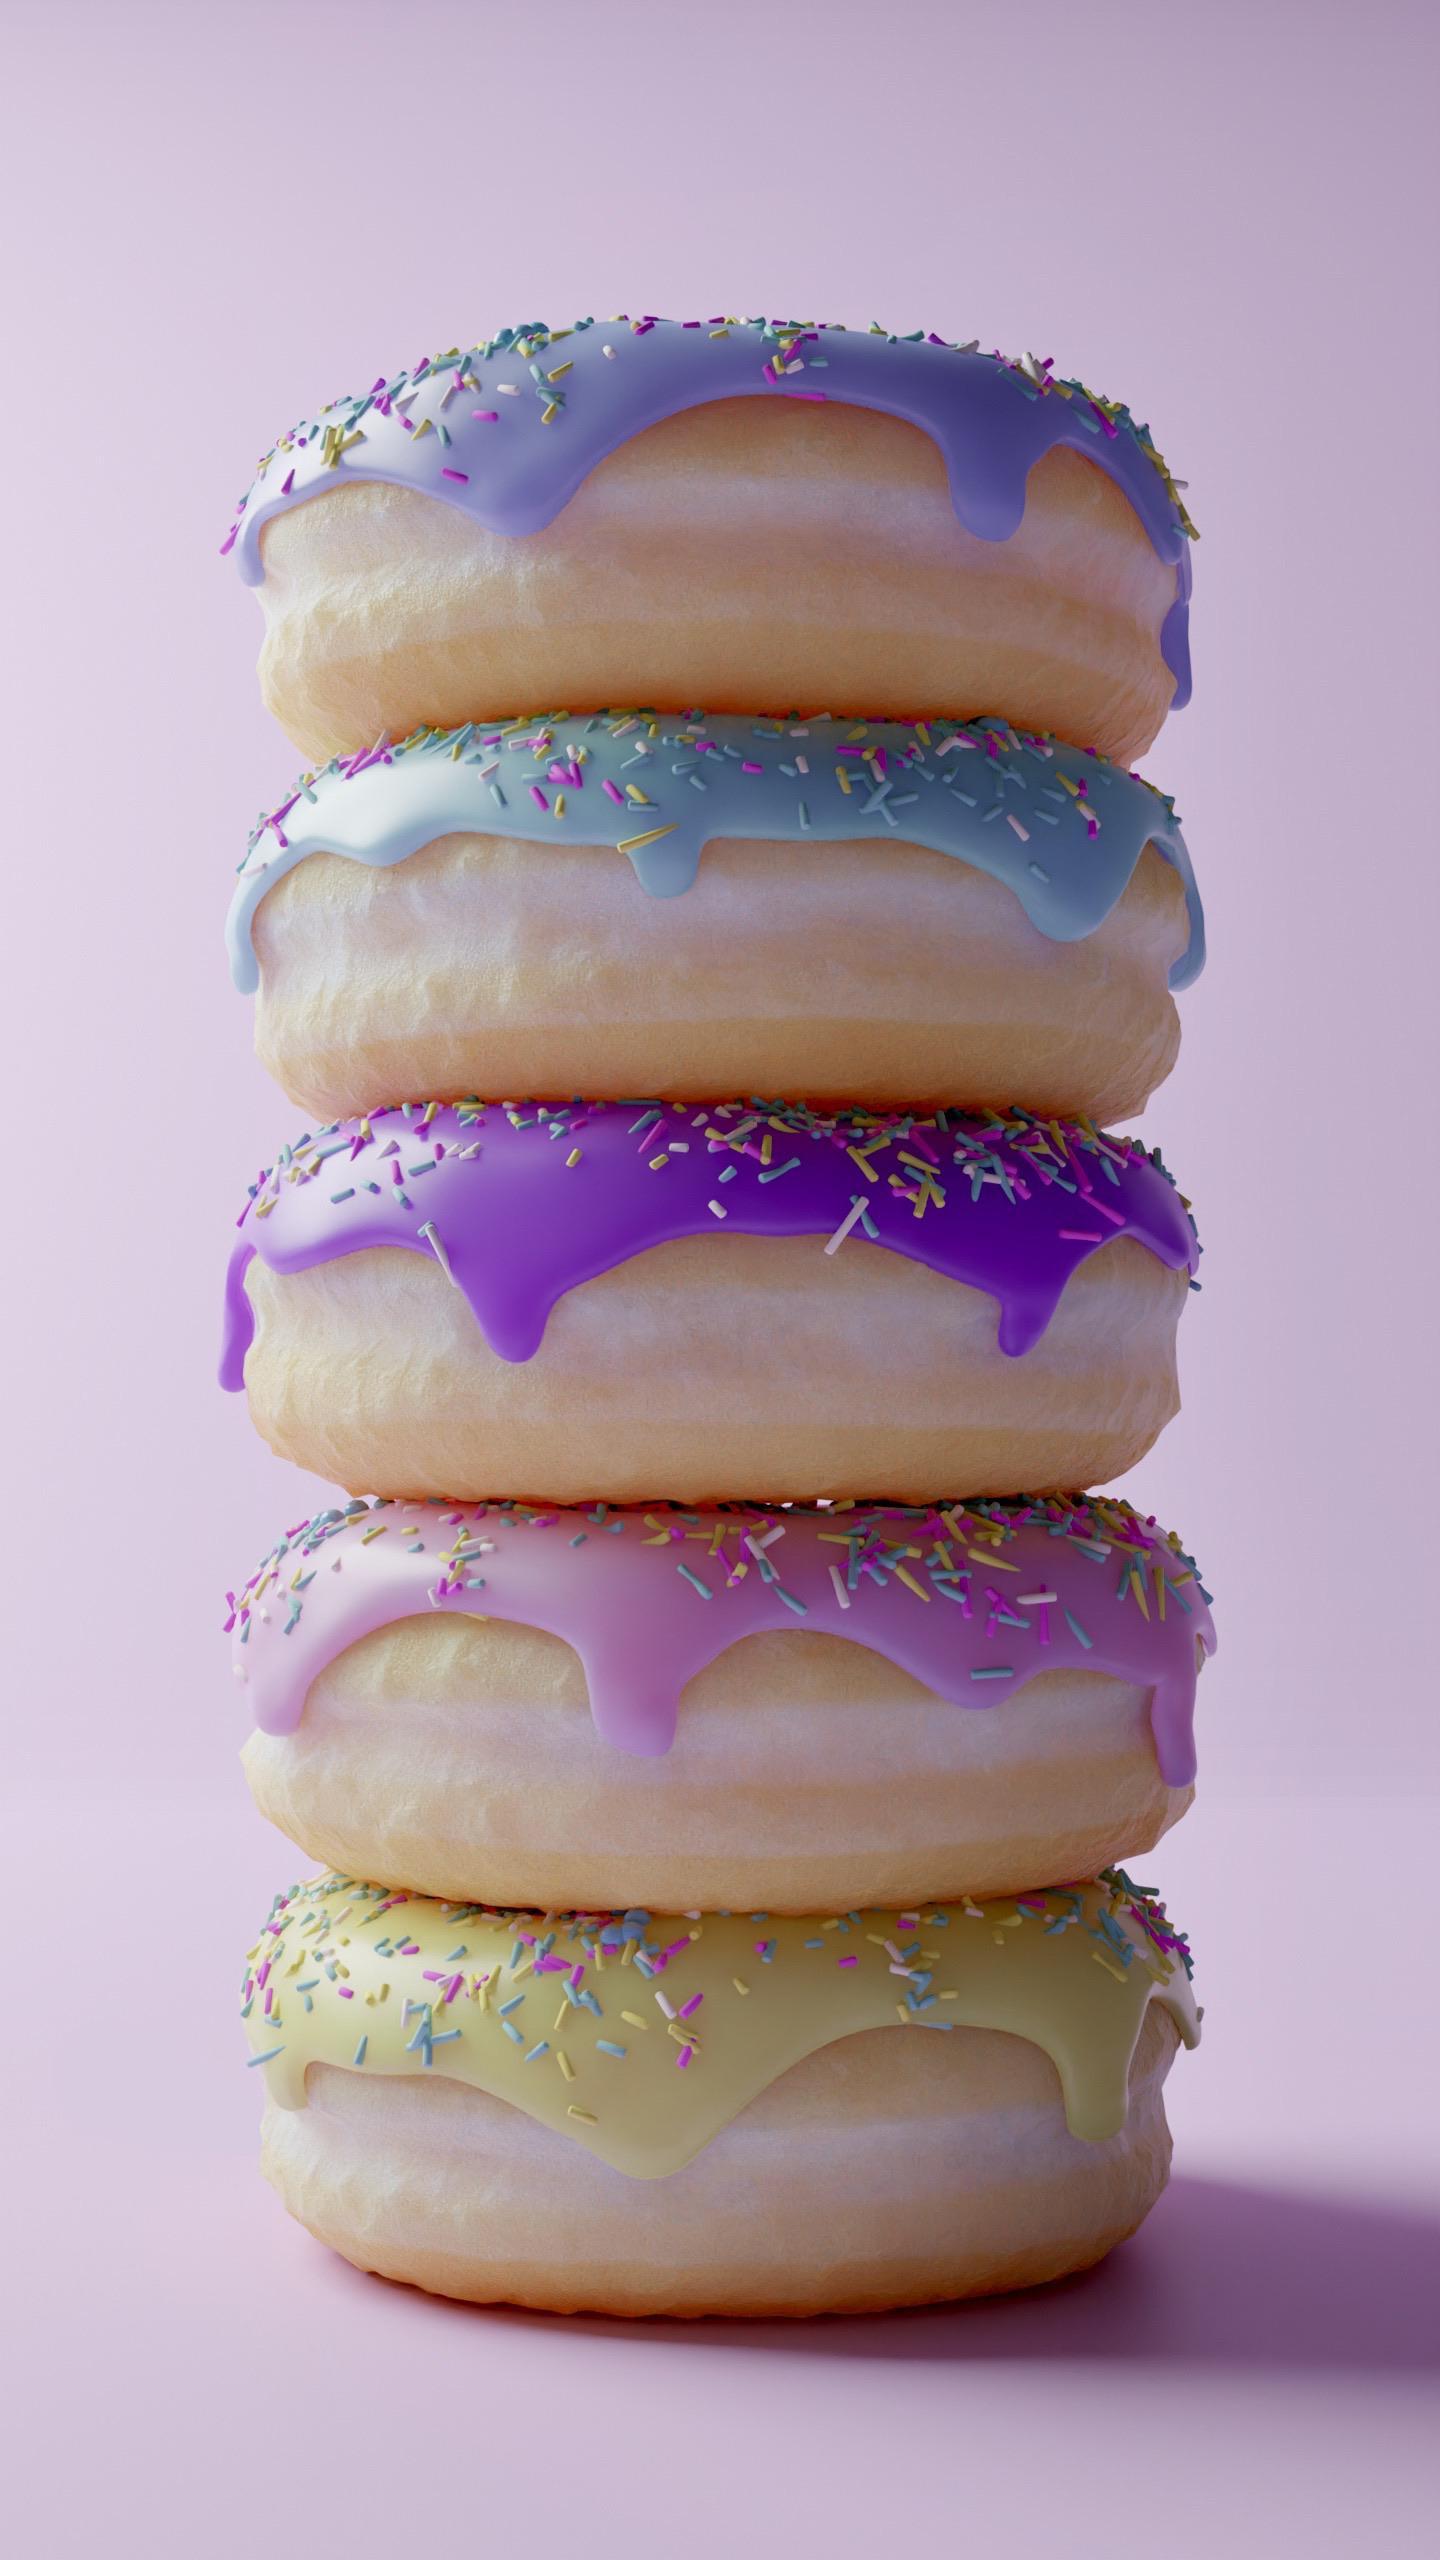 Donut Phone Wallpapers - Top Free Donut ...